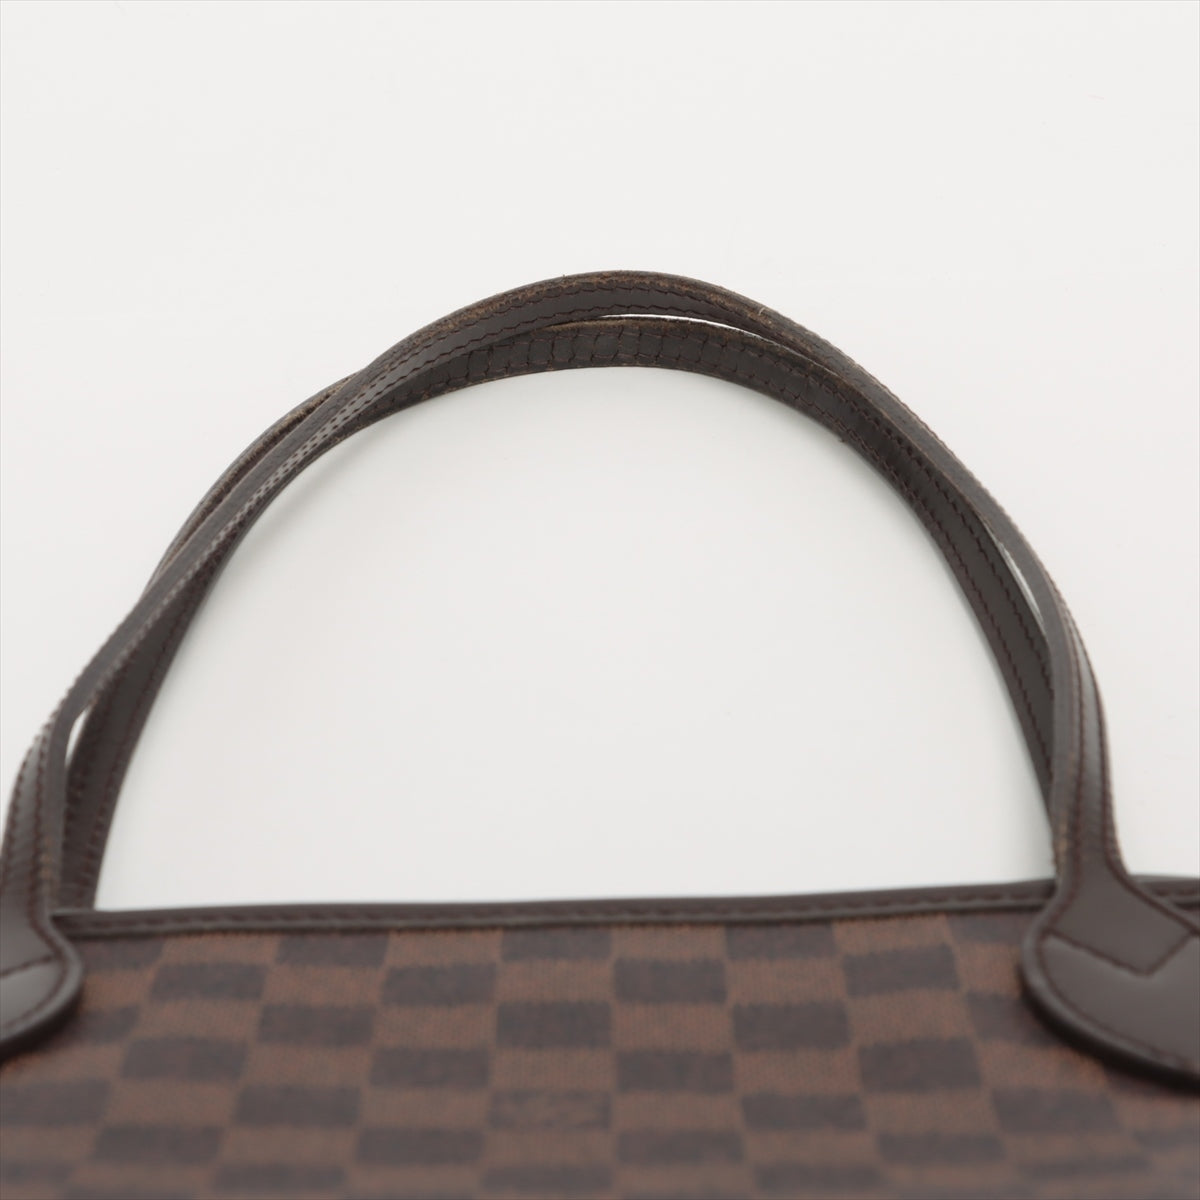 LOUIS VUITTON Neverfull MM in Damier N51105 Tote